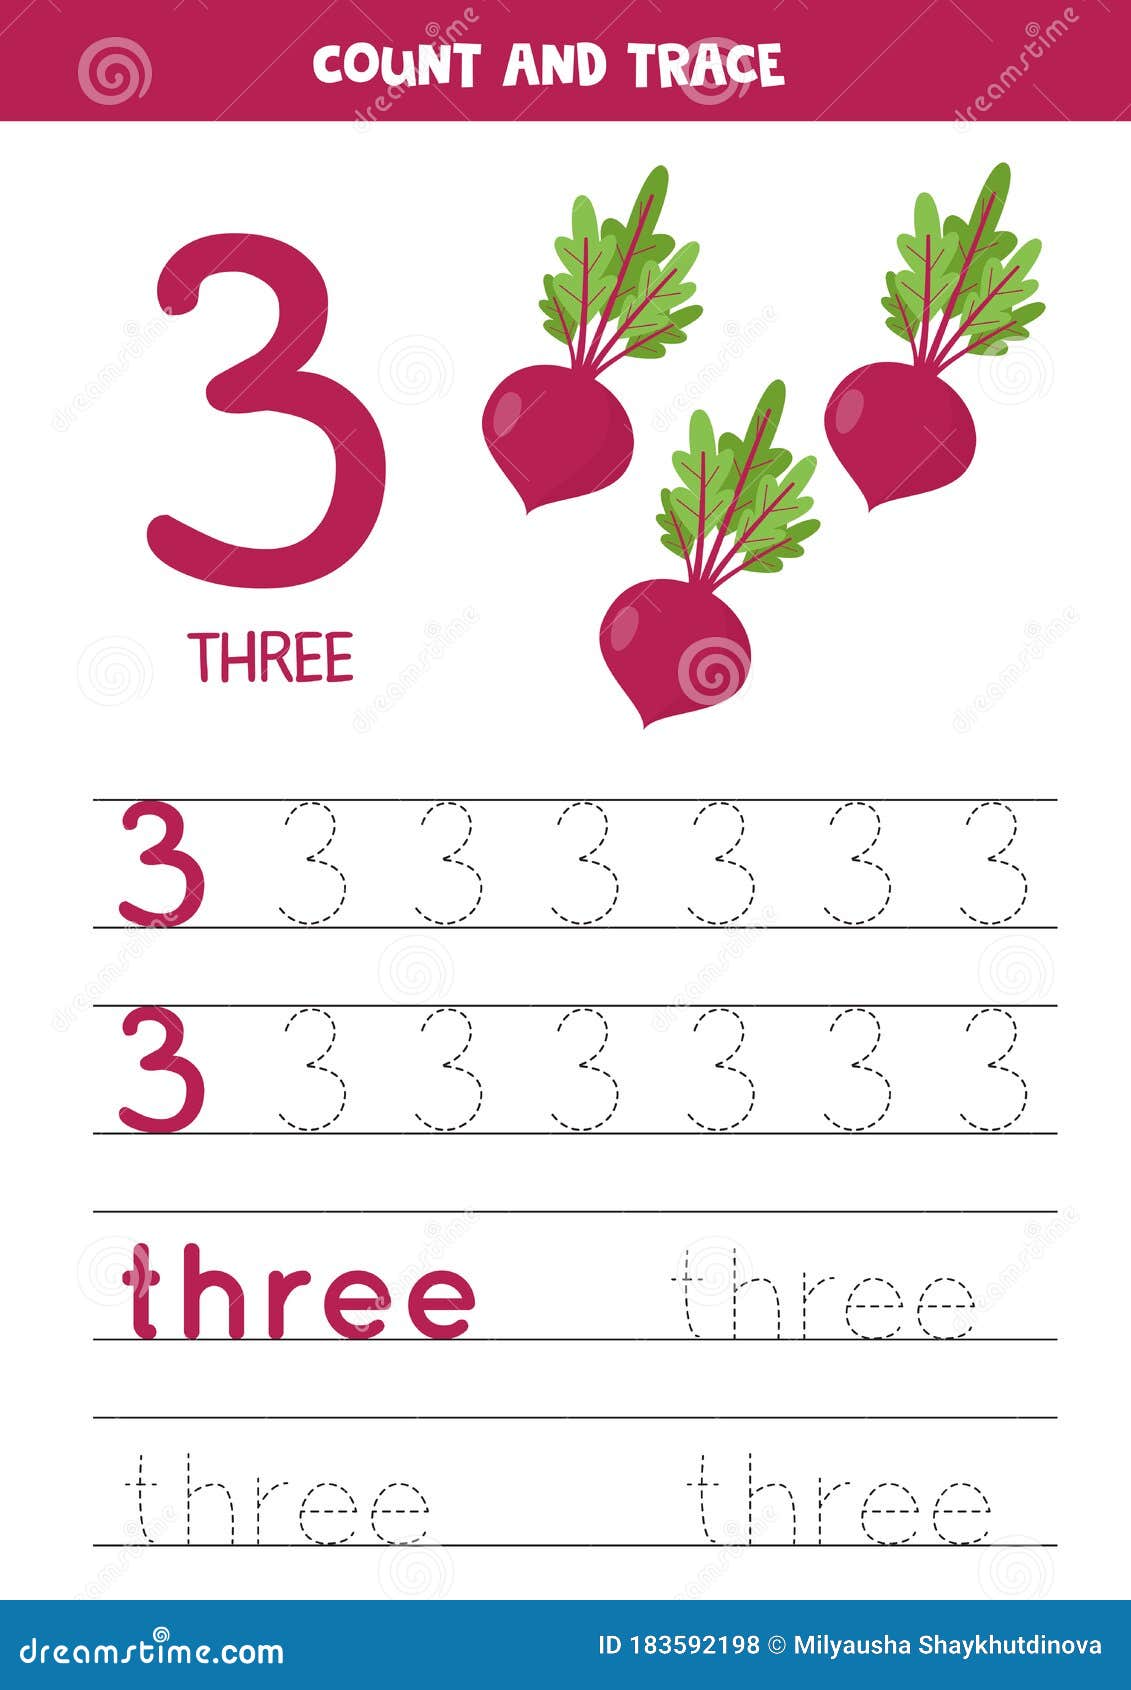 tracing the word three and the number 3 cartoon beets images stock vector illustration of homework cute 183592198